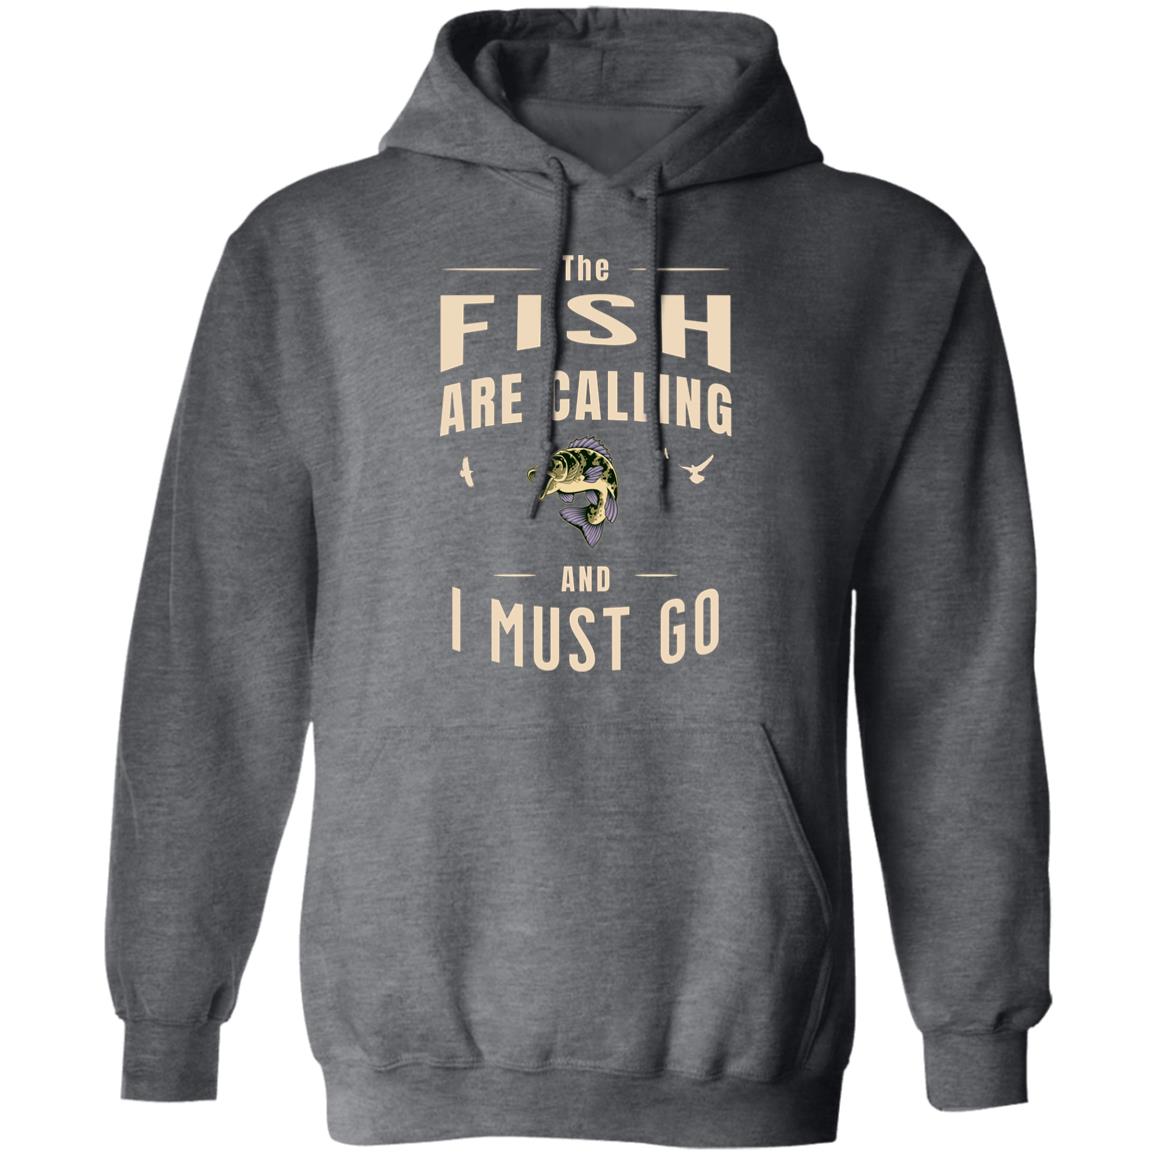 The fish are calling and i must go-hoodie k dark-heather